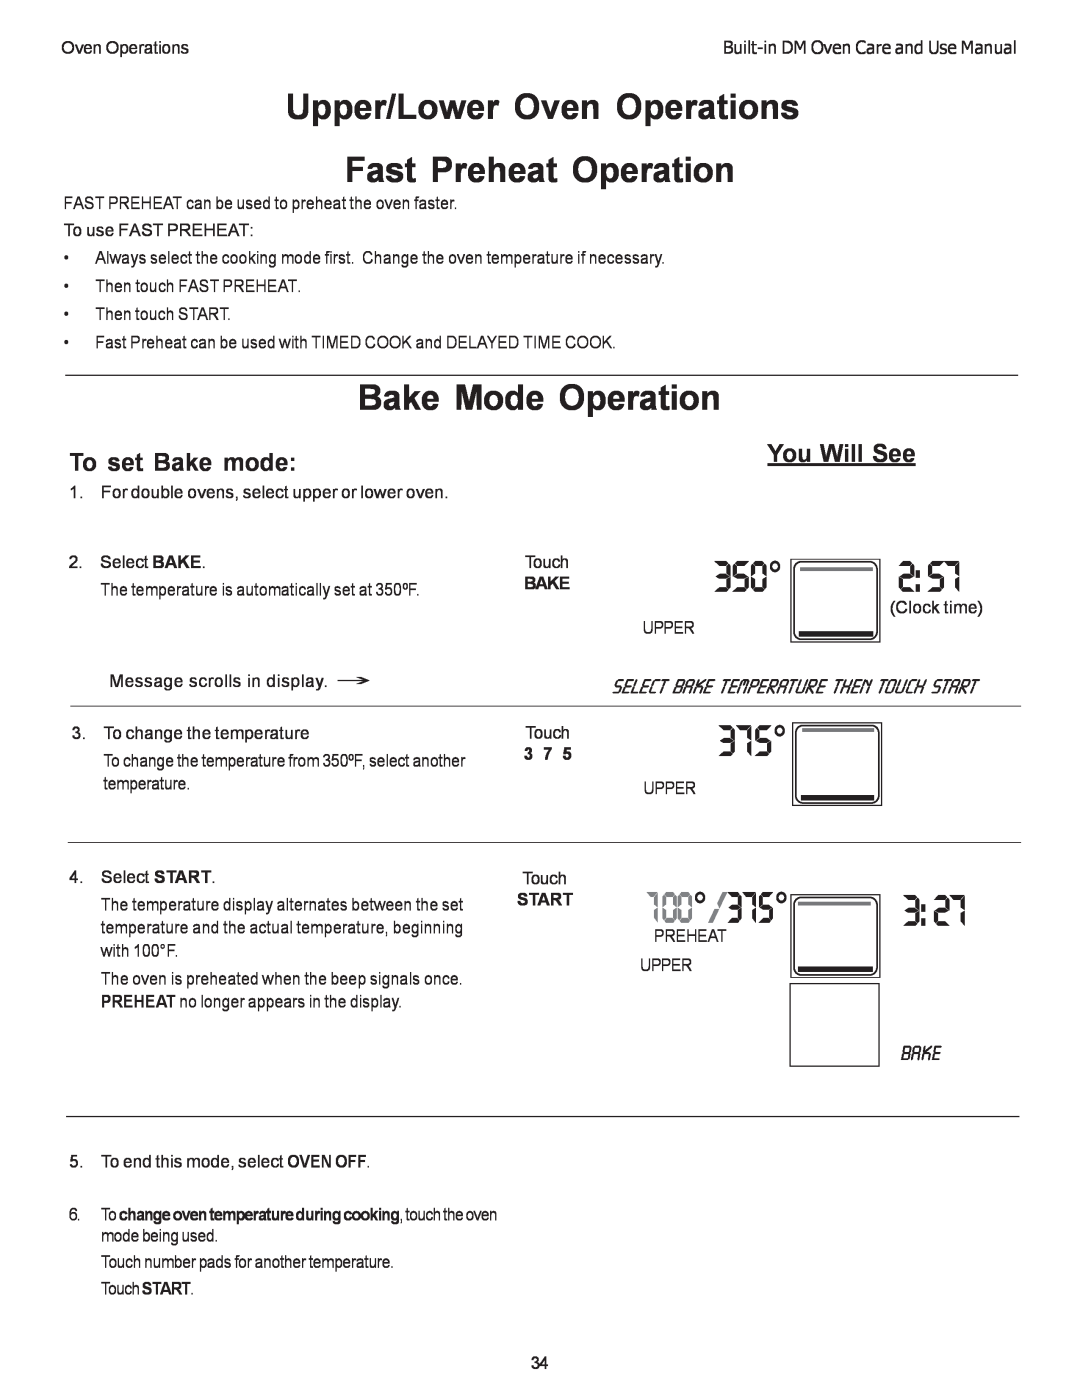 Thermador DM302, DM301 100/375, Upper/Lower Oven Operations Fast Preheat Operation, Bake Mode Operation, To set Bake mode 